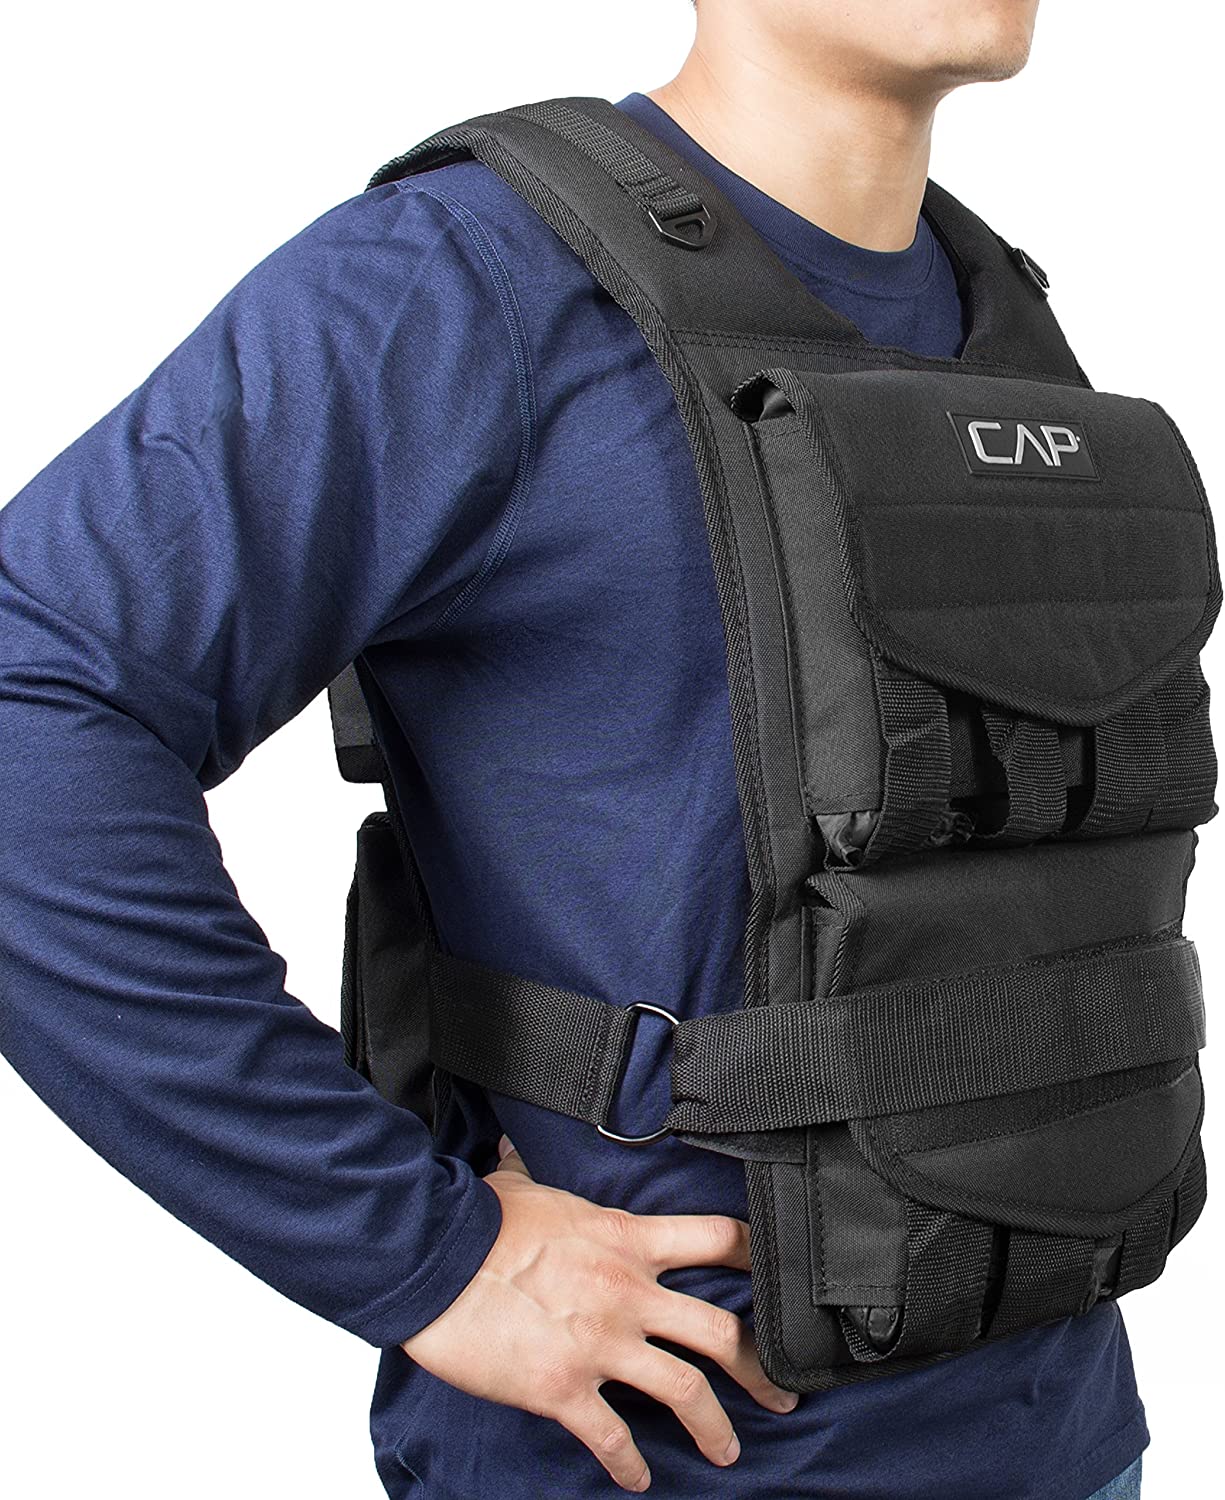 cap barbell adjustable weighted vest, 40 lb - image 3 of 5